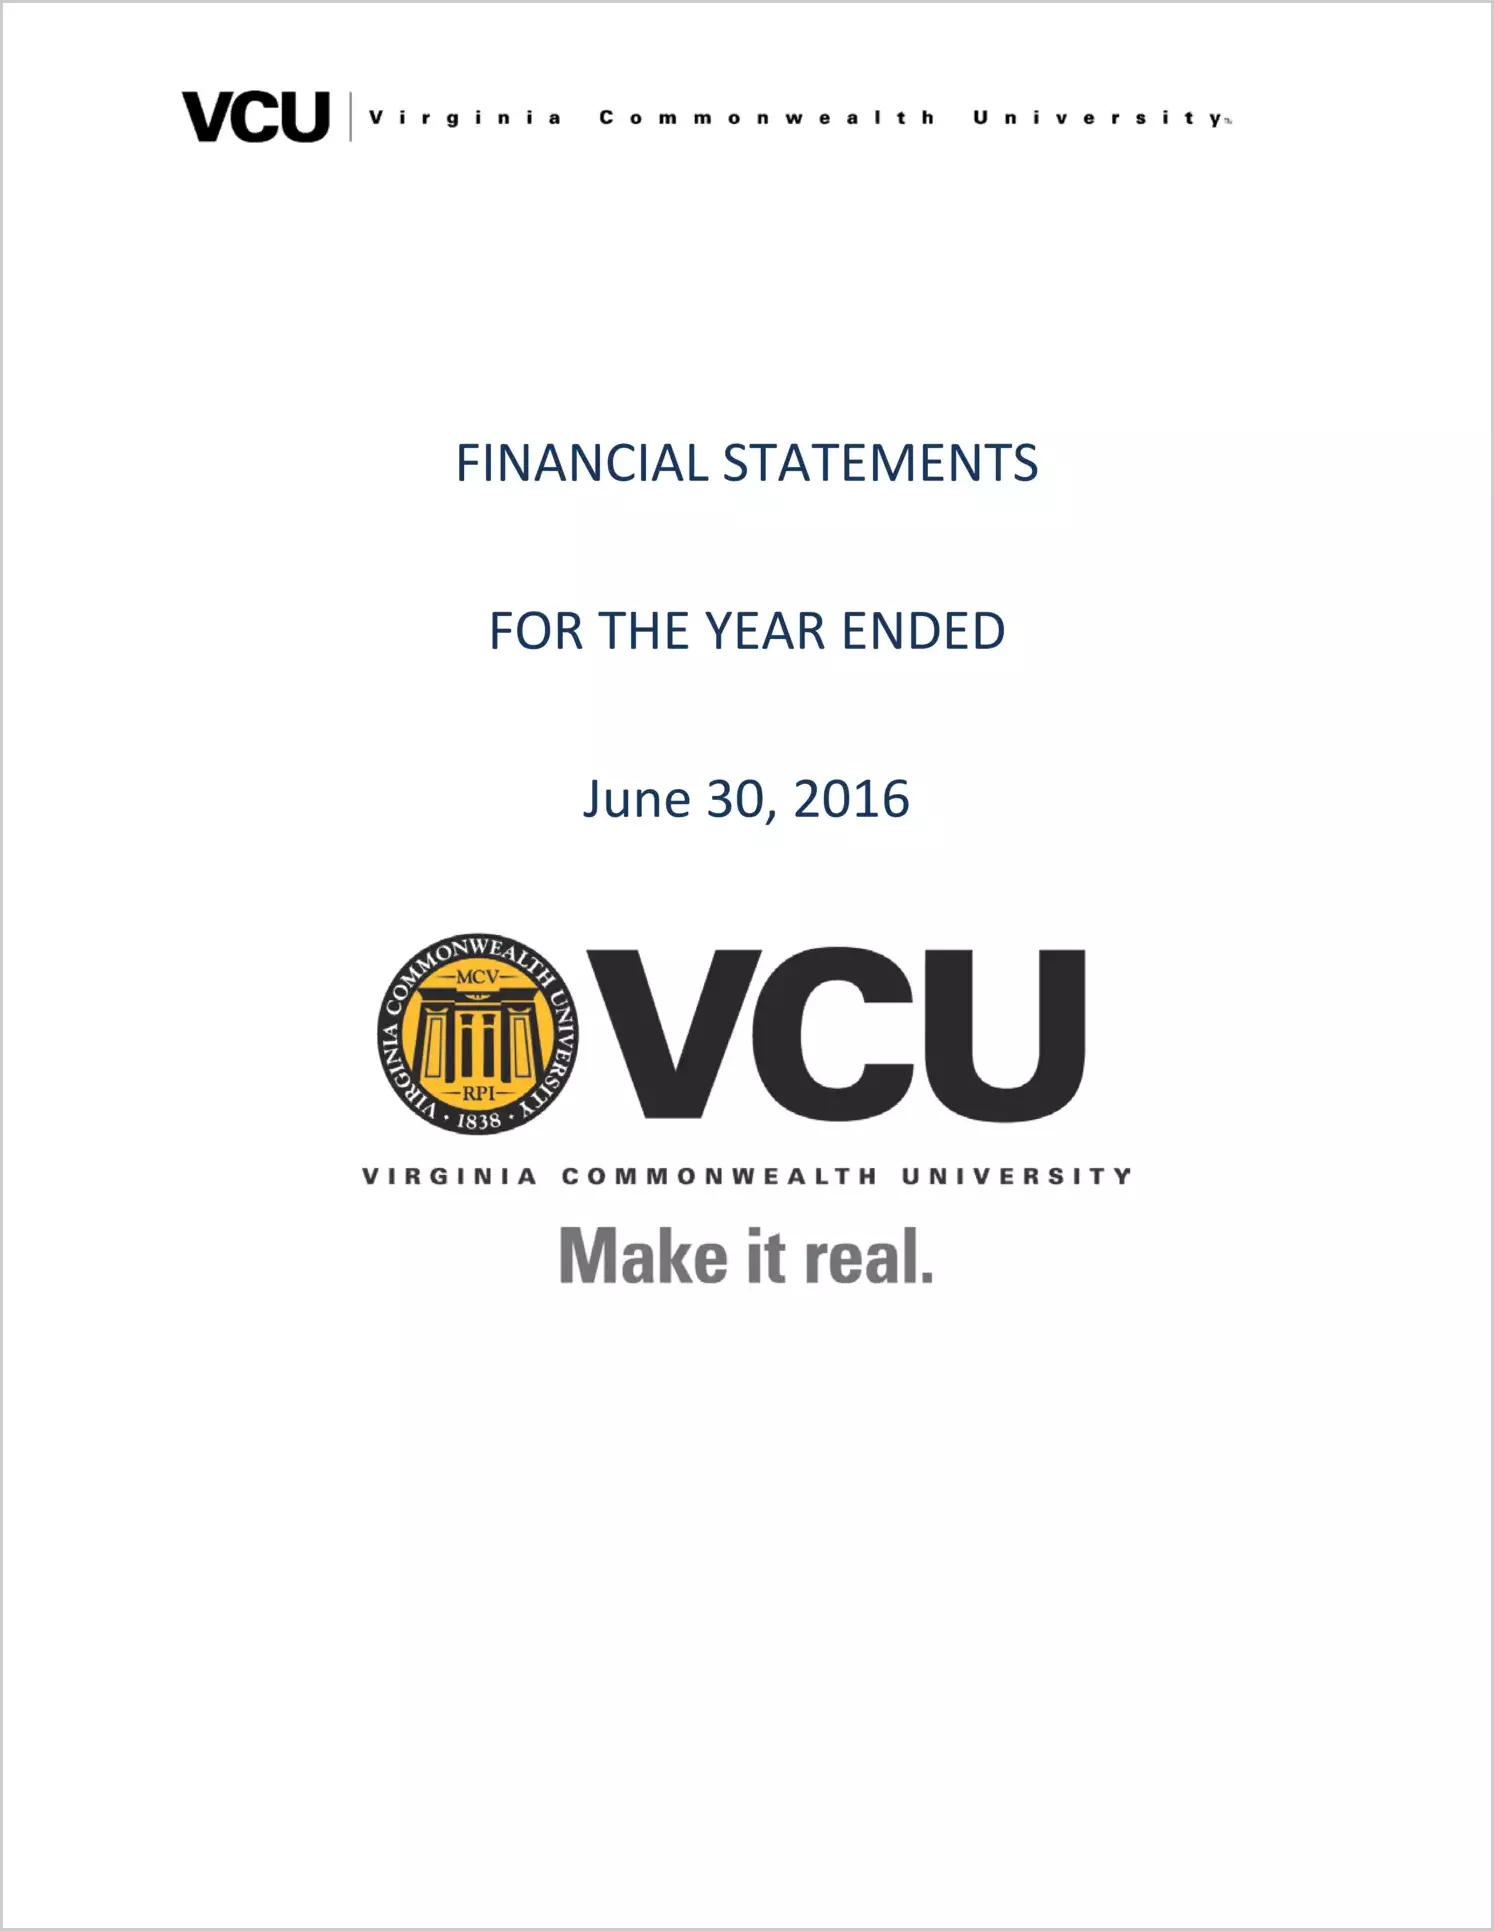 Virginia Commonwealth University for the year ended June 30, 2016